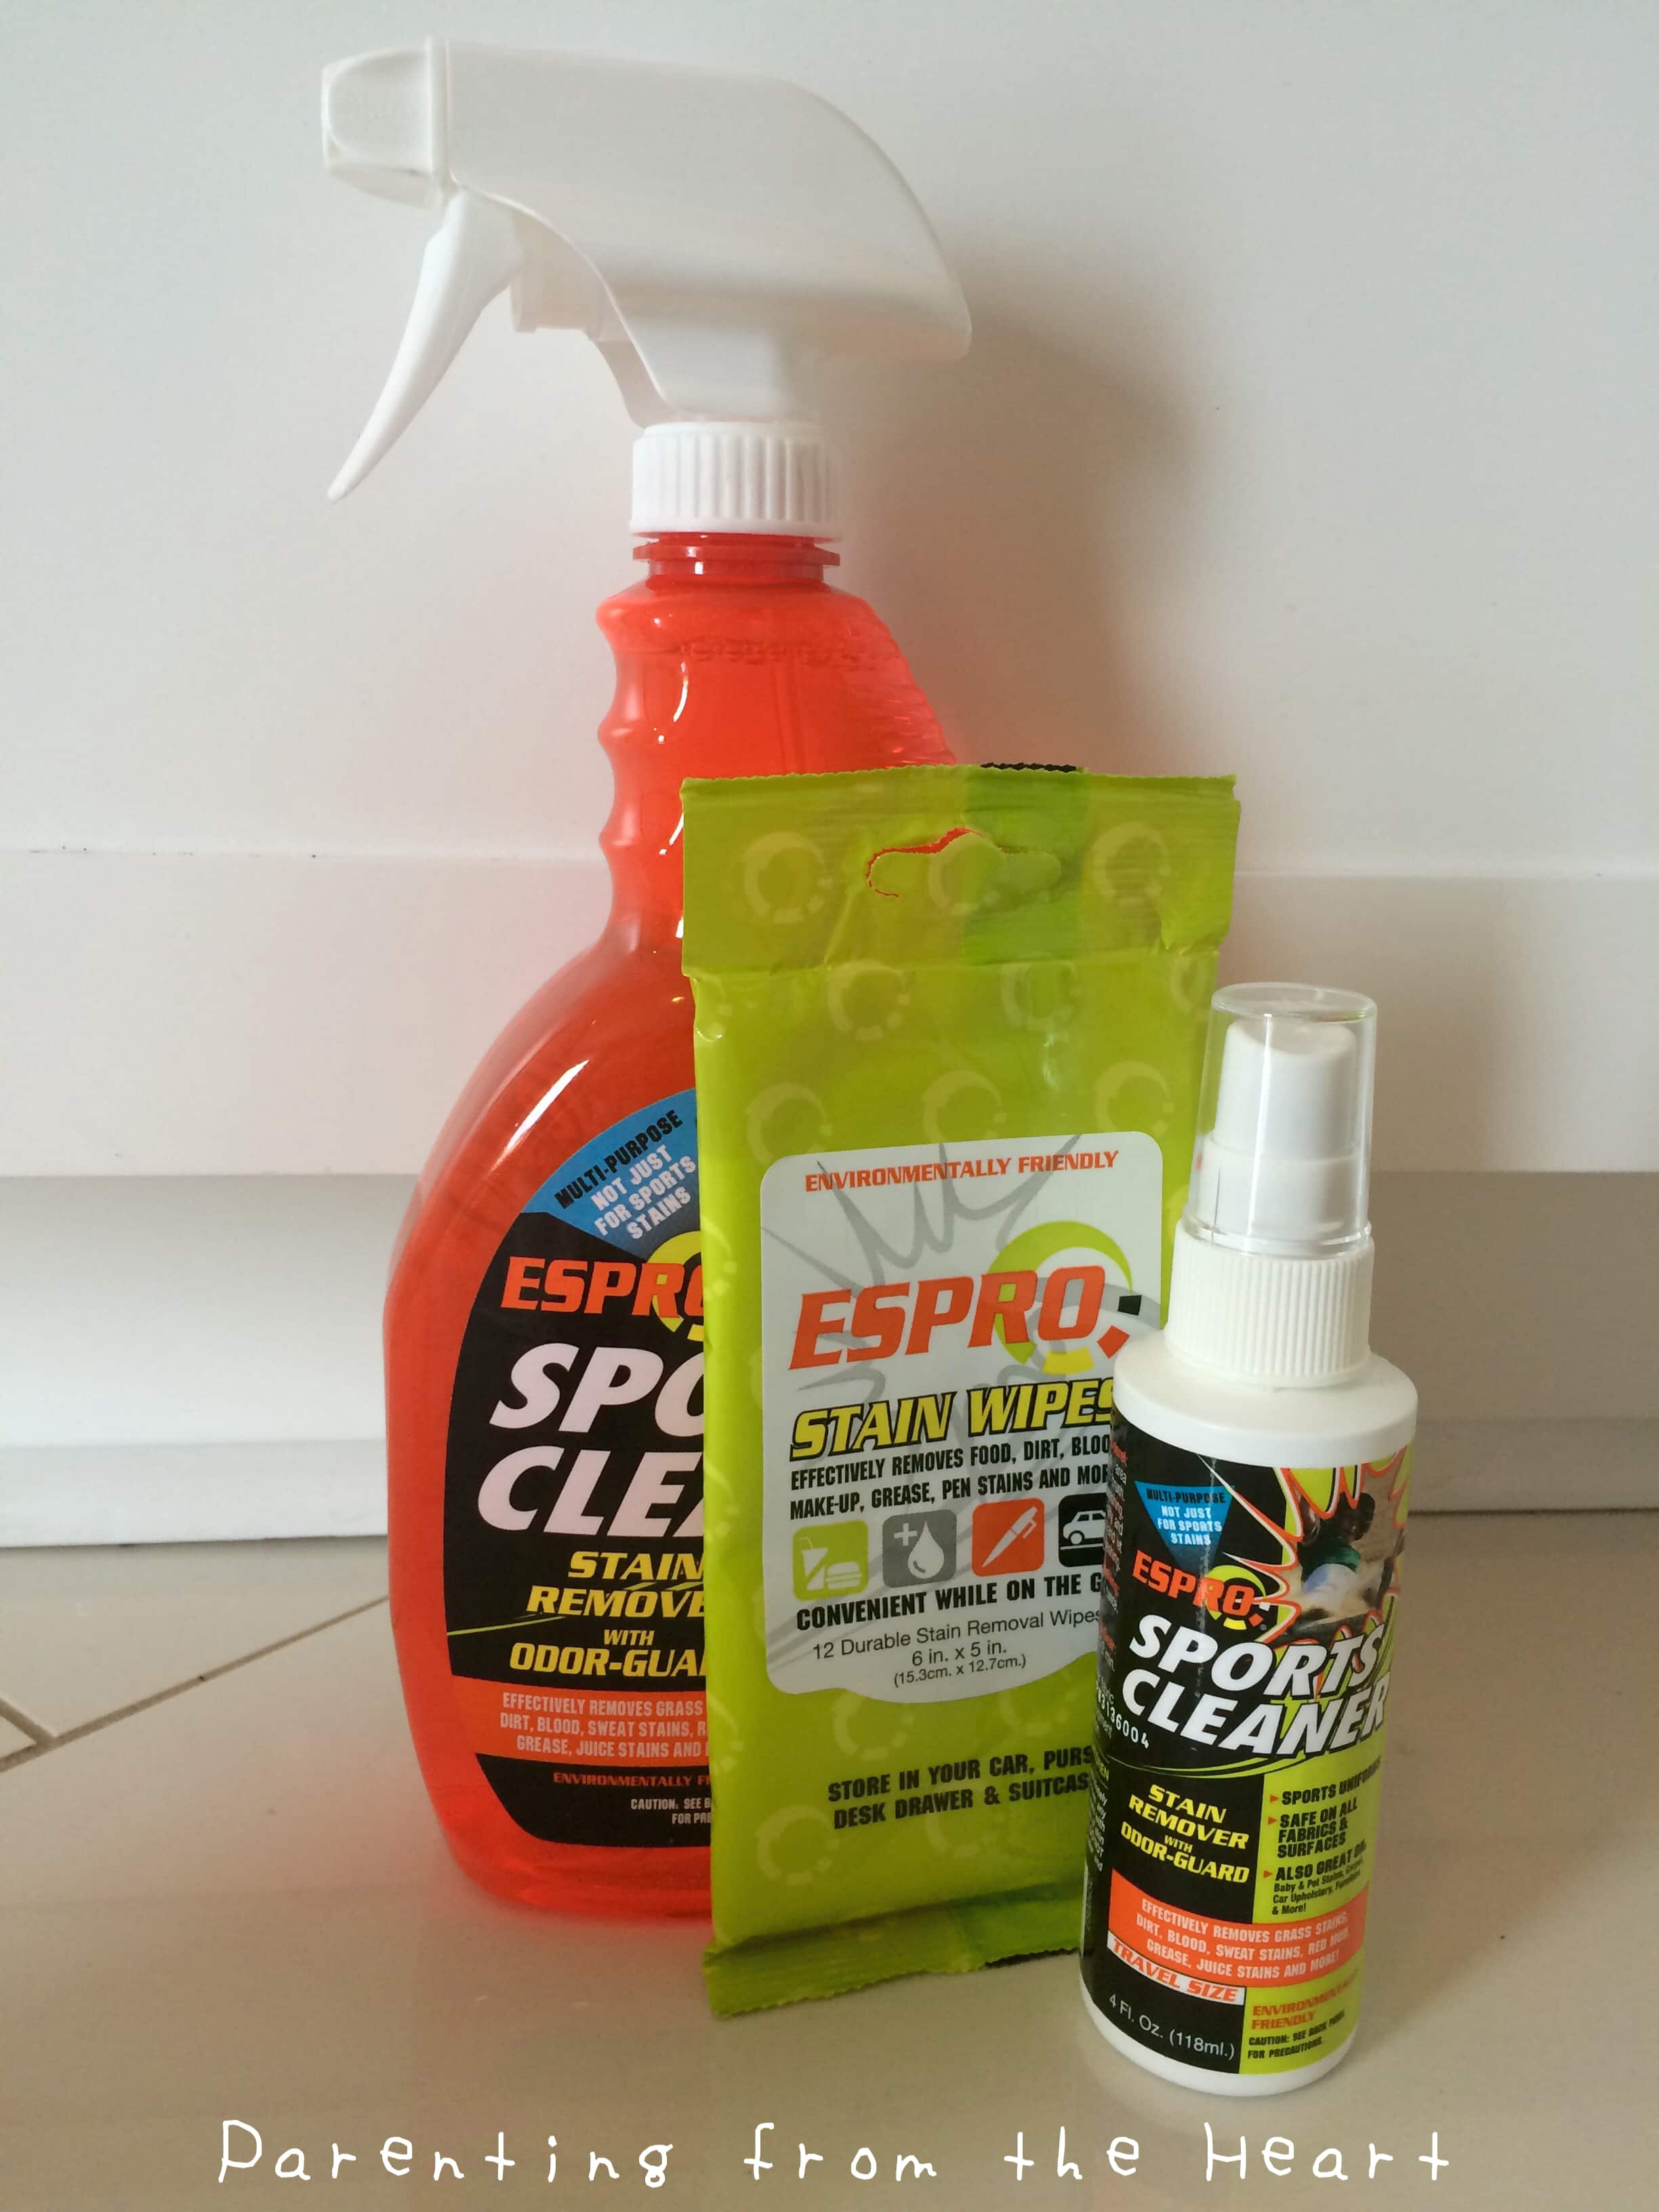 ESPRO Sports Cleaner Review | Parenting from the Heart